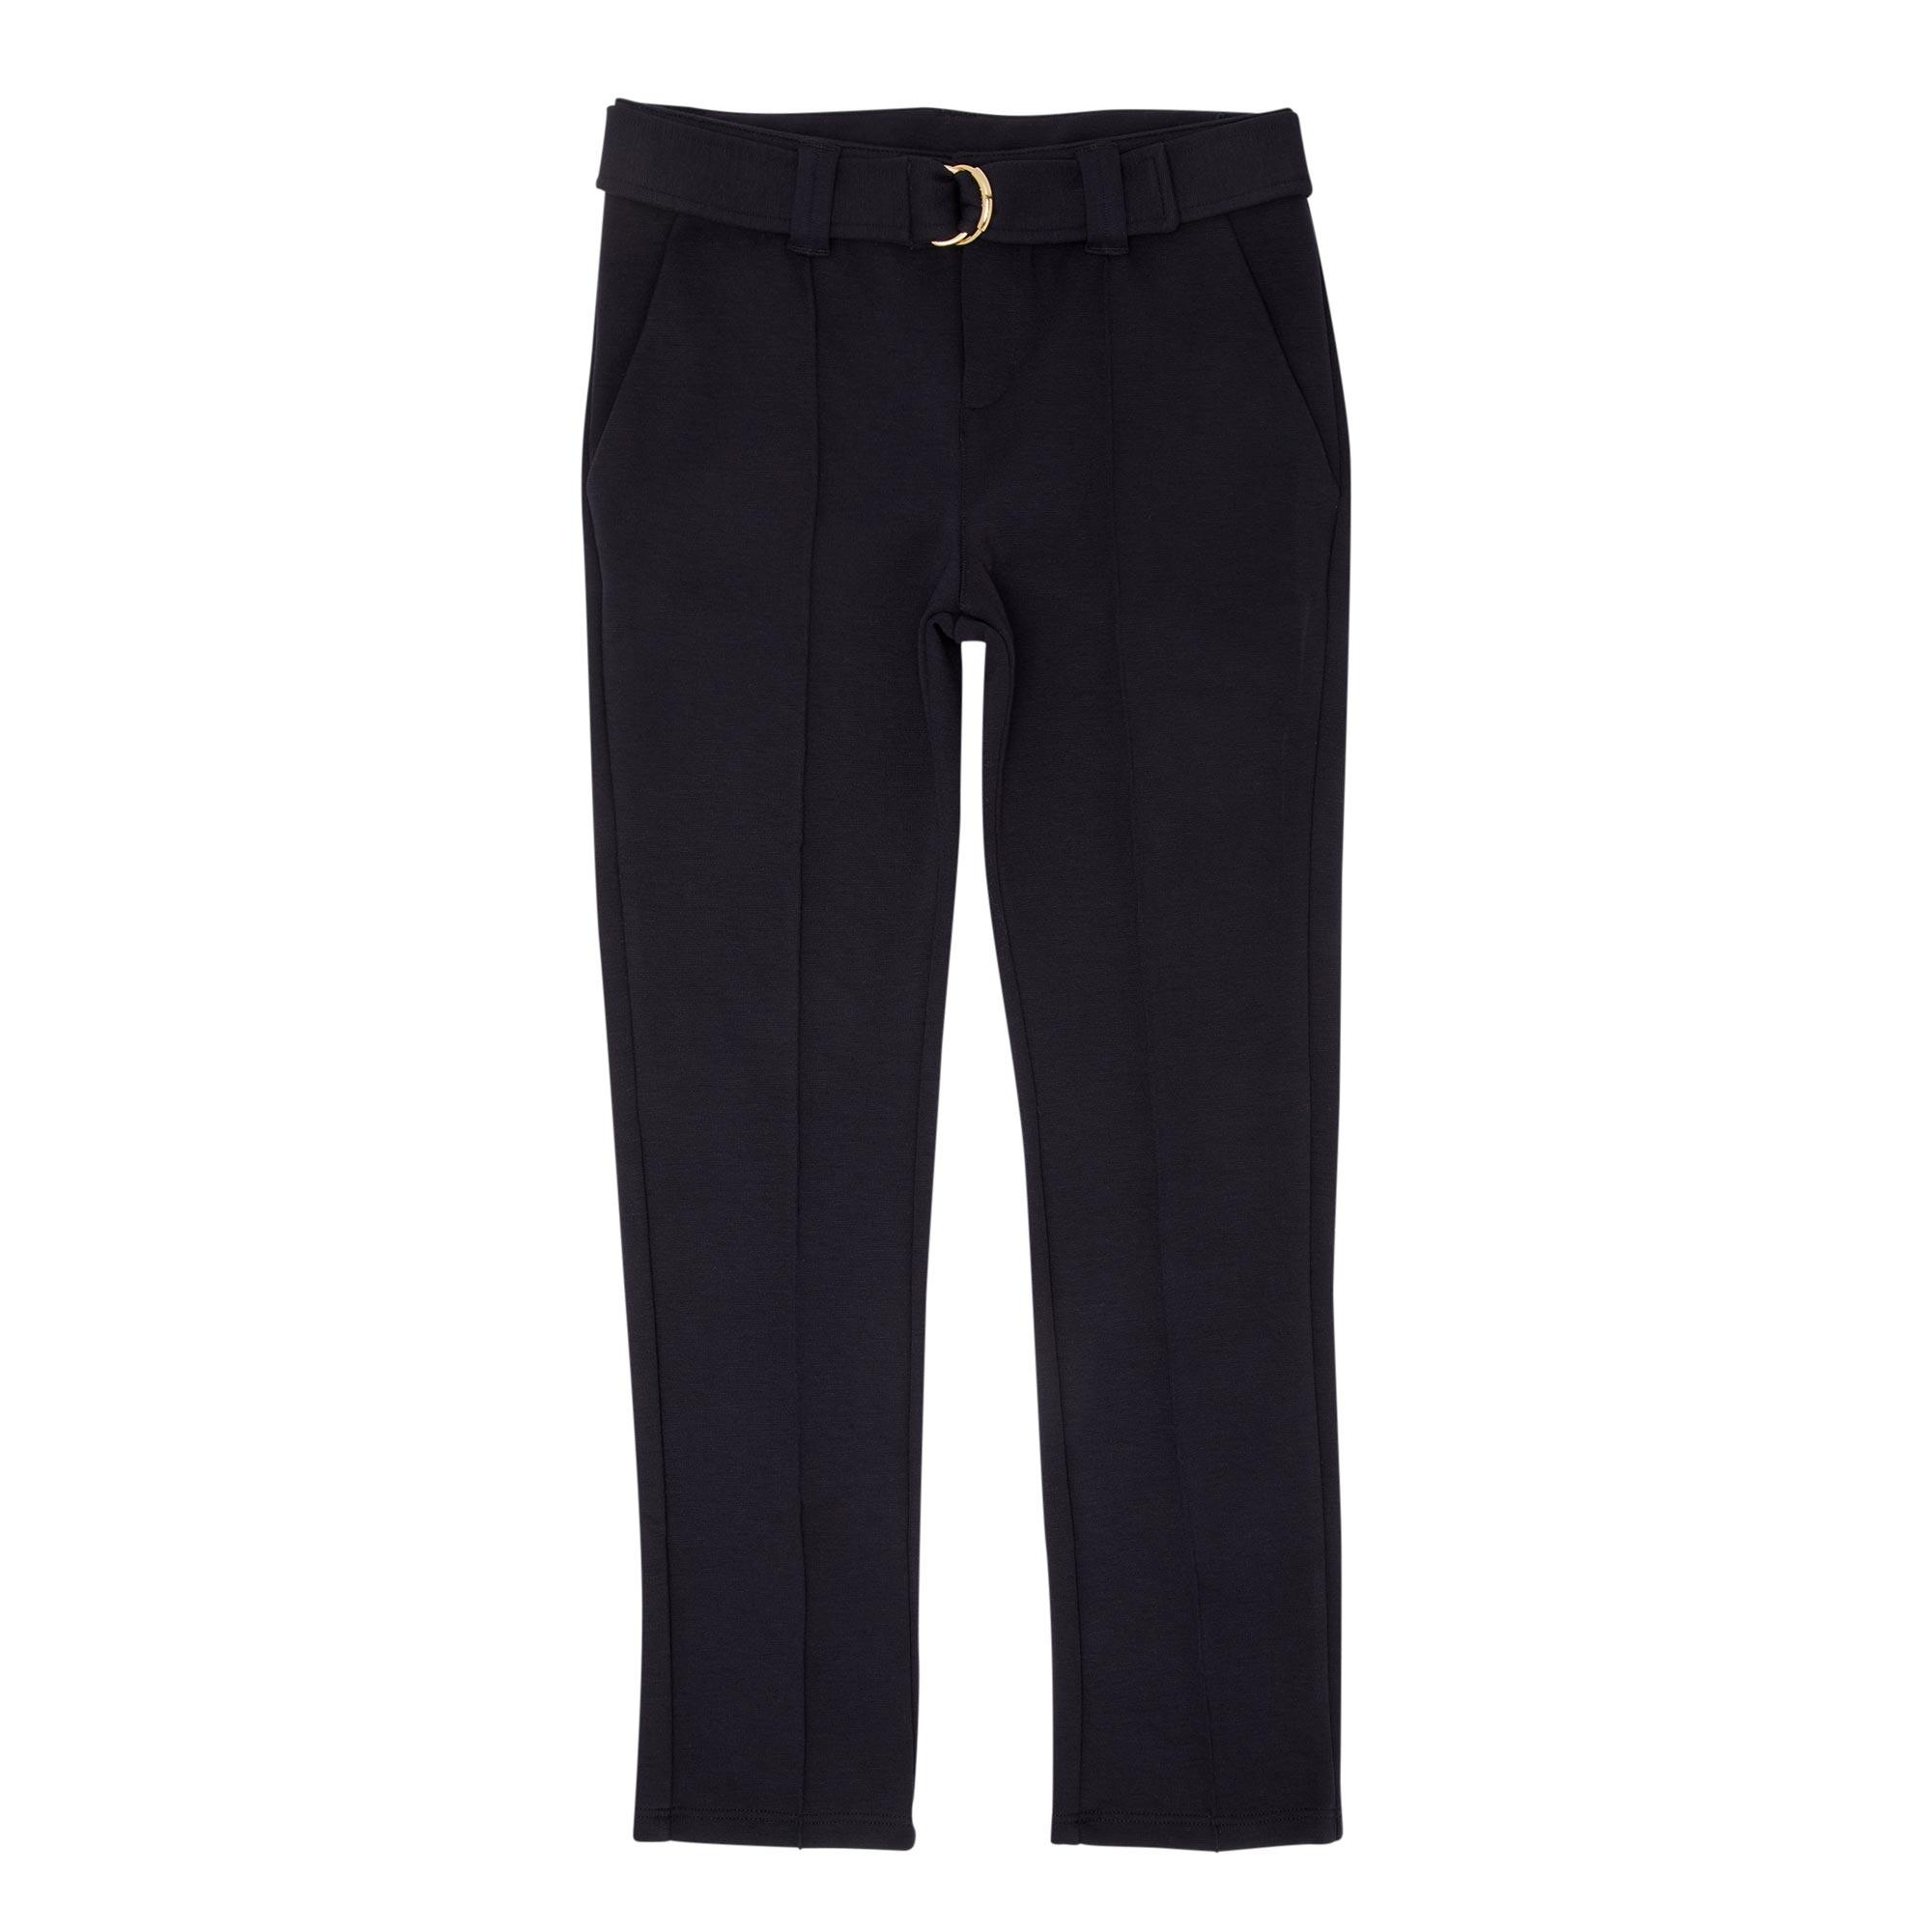 Dunnes Stores  Black Ponte Trousers